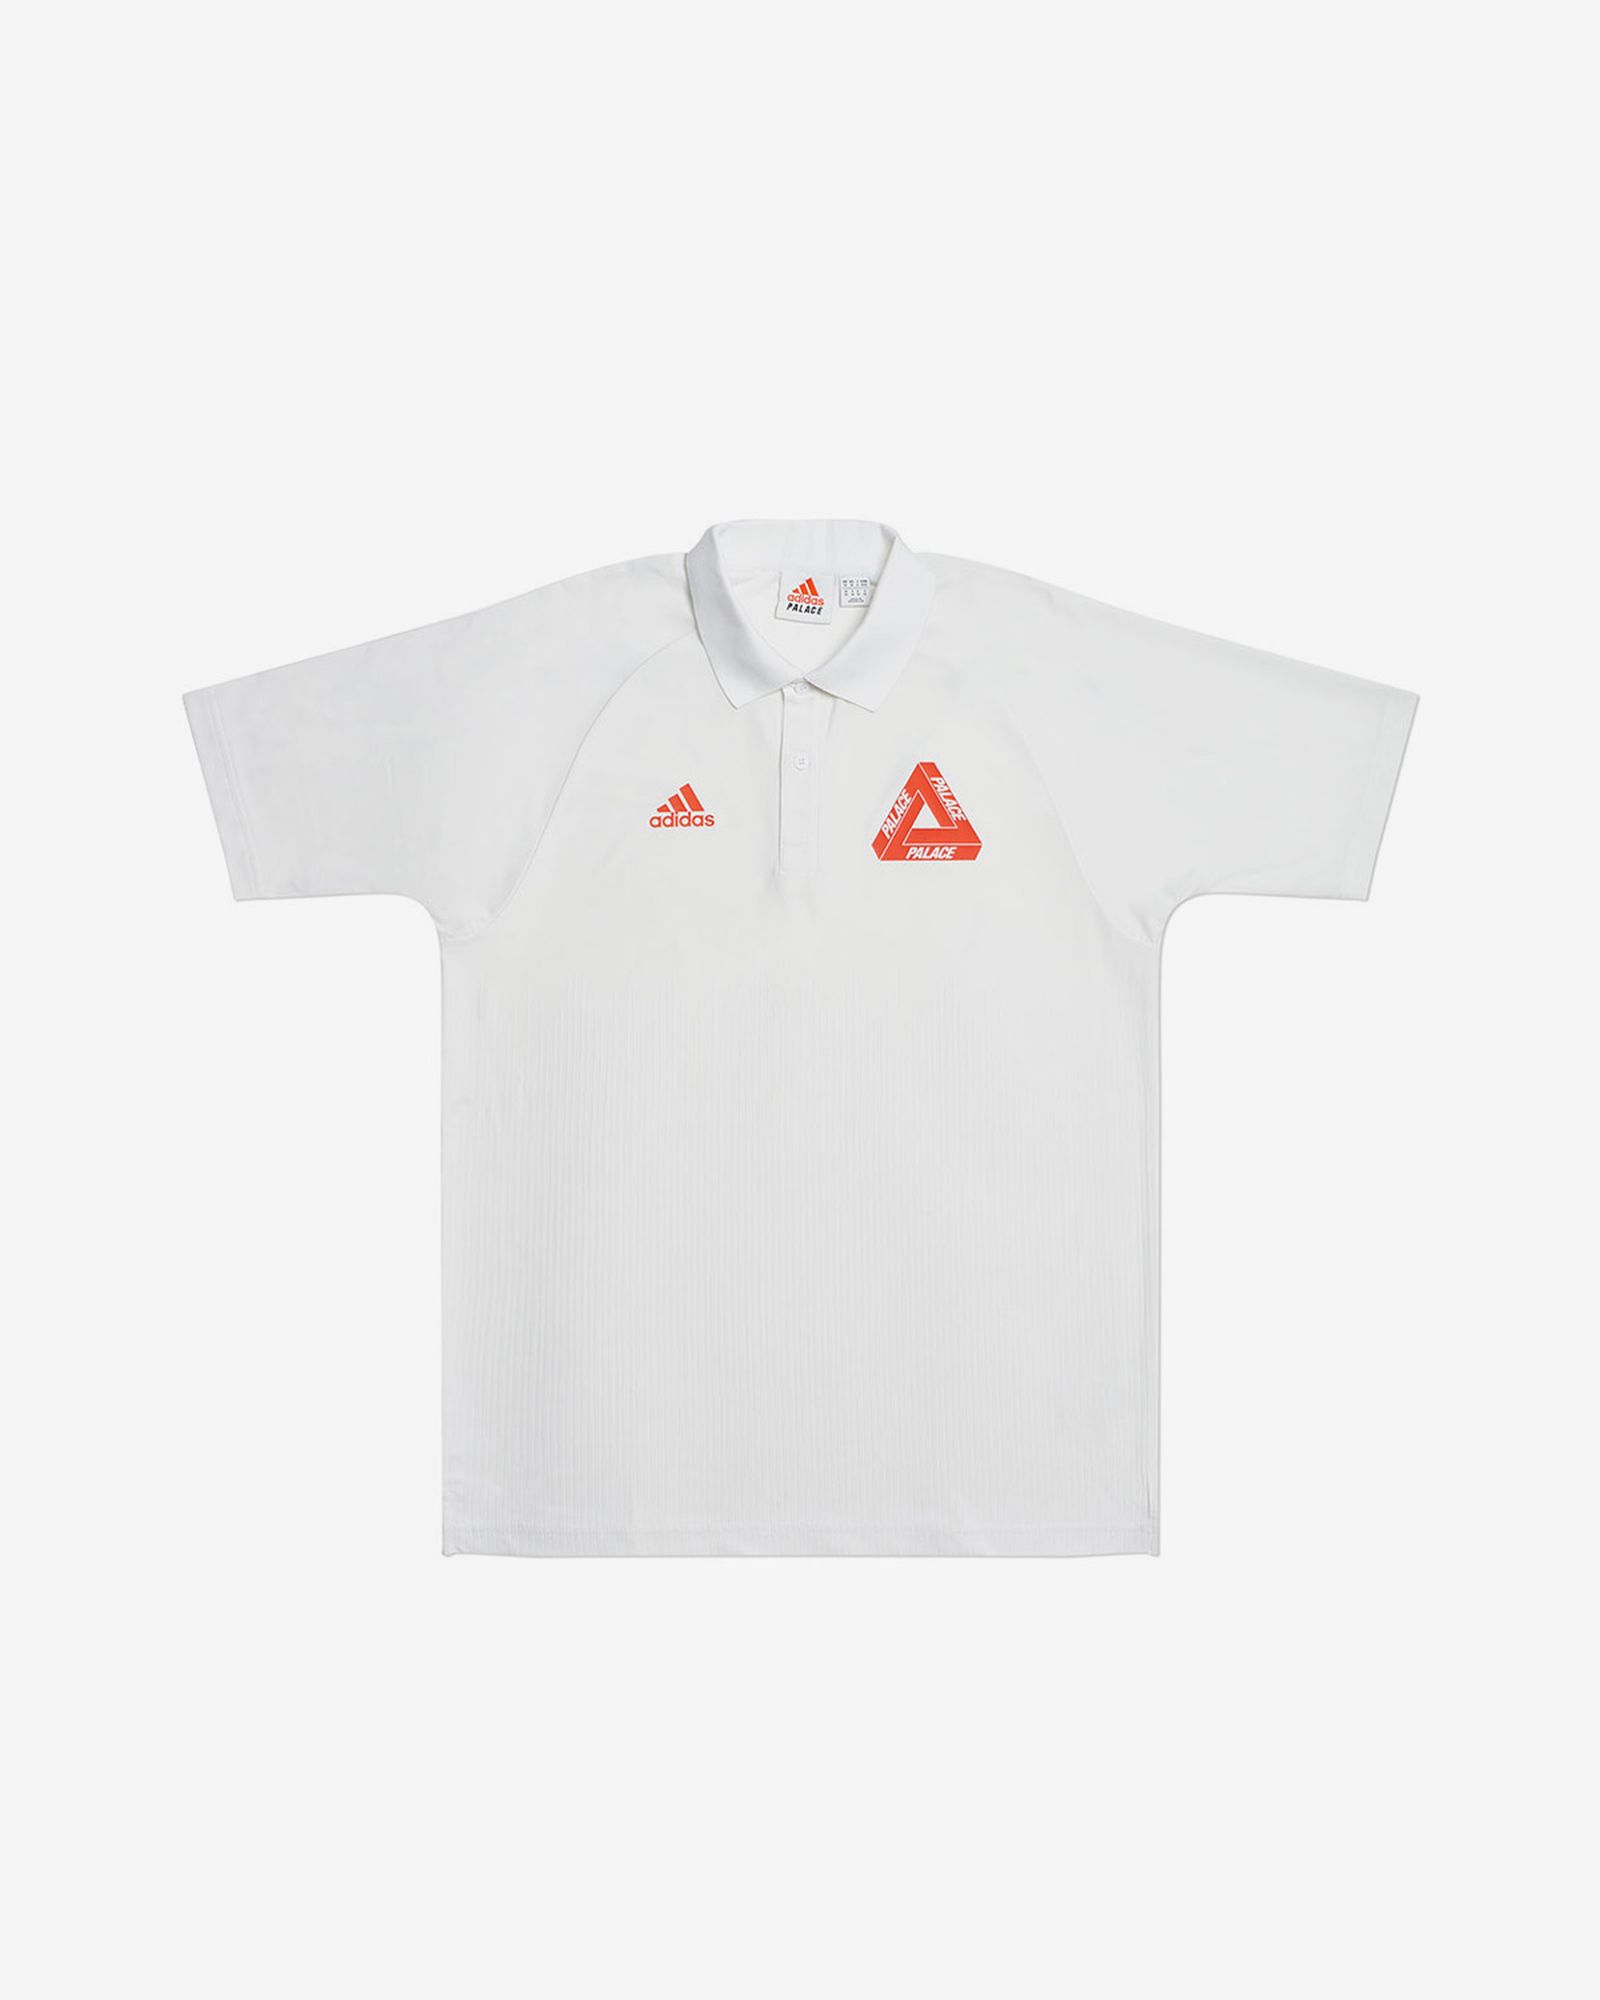 palace-adidas-golf-collaboration-official-look-05